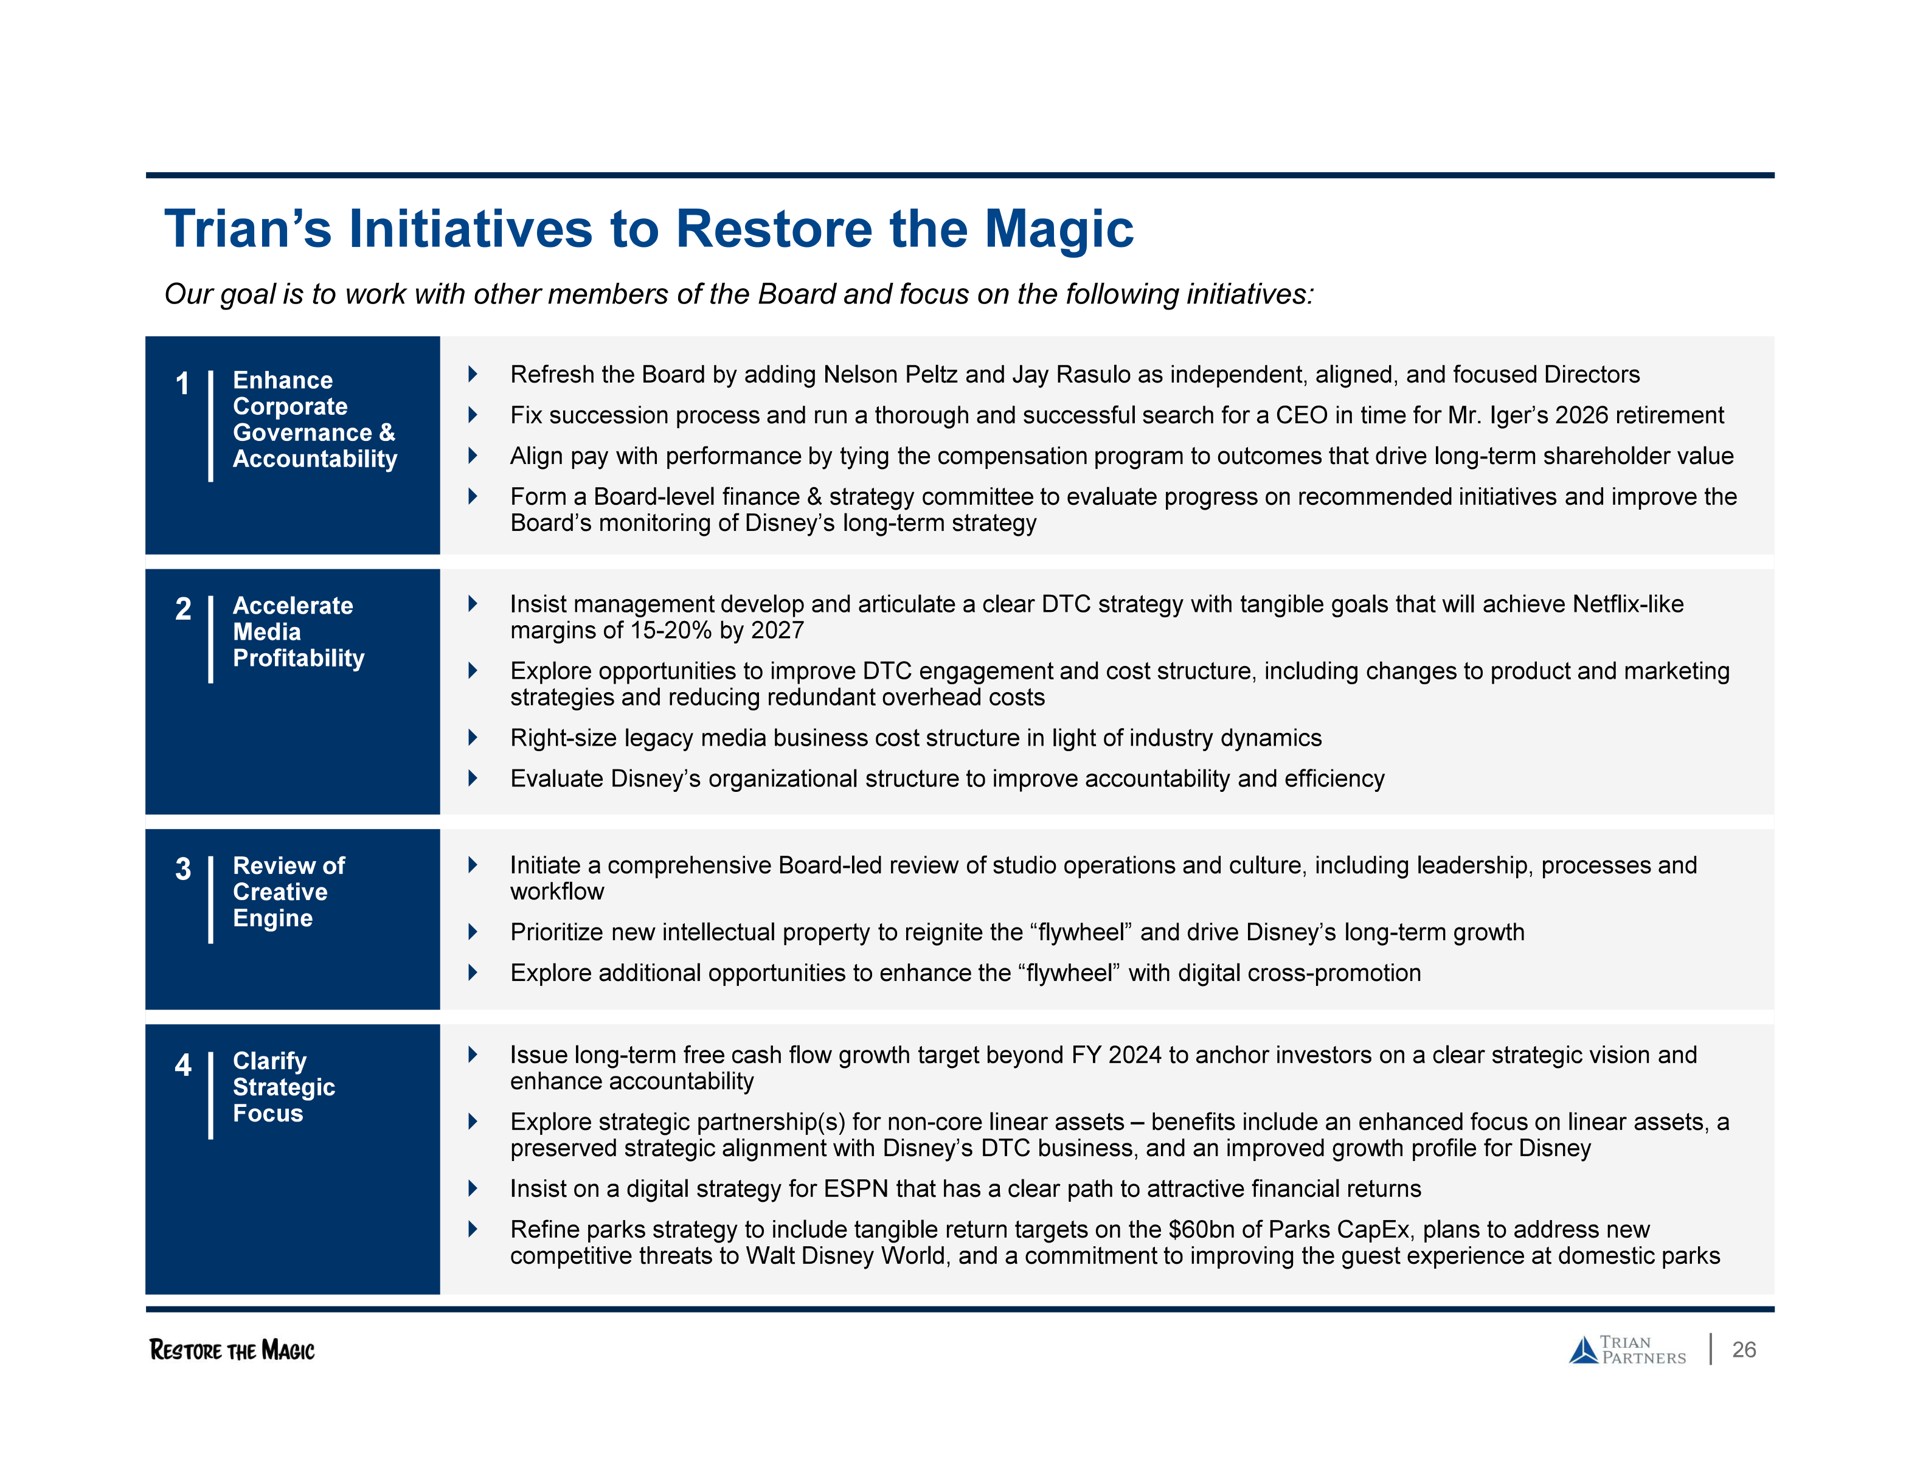 initiatives to restore the magic | Trian Partners